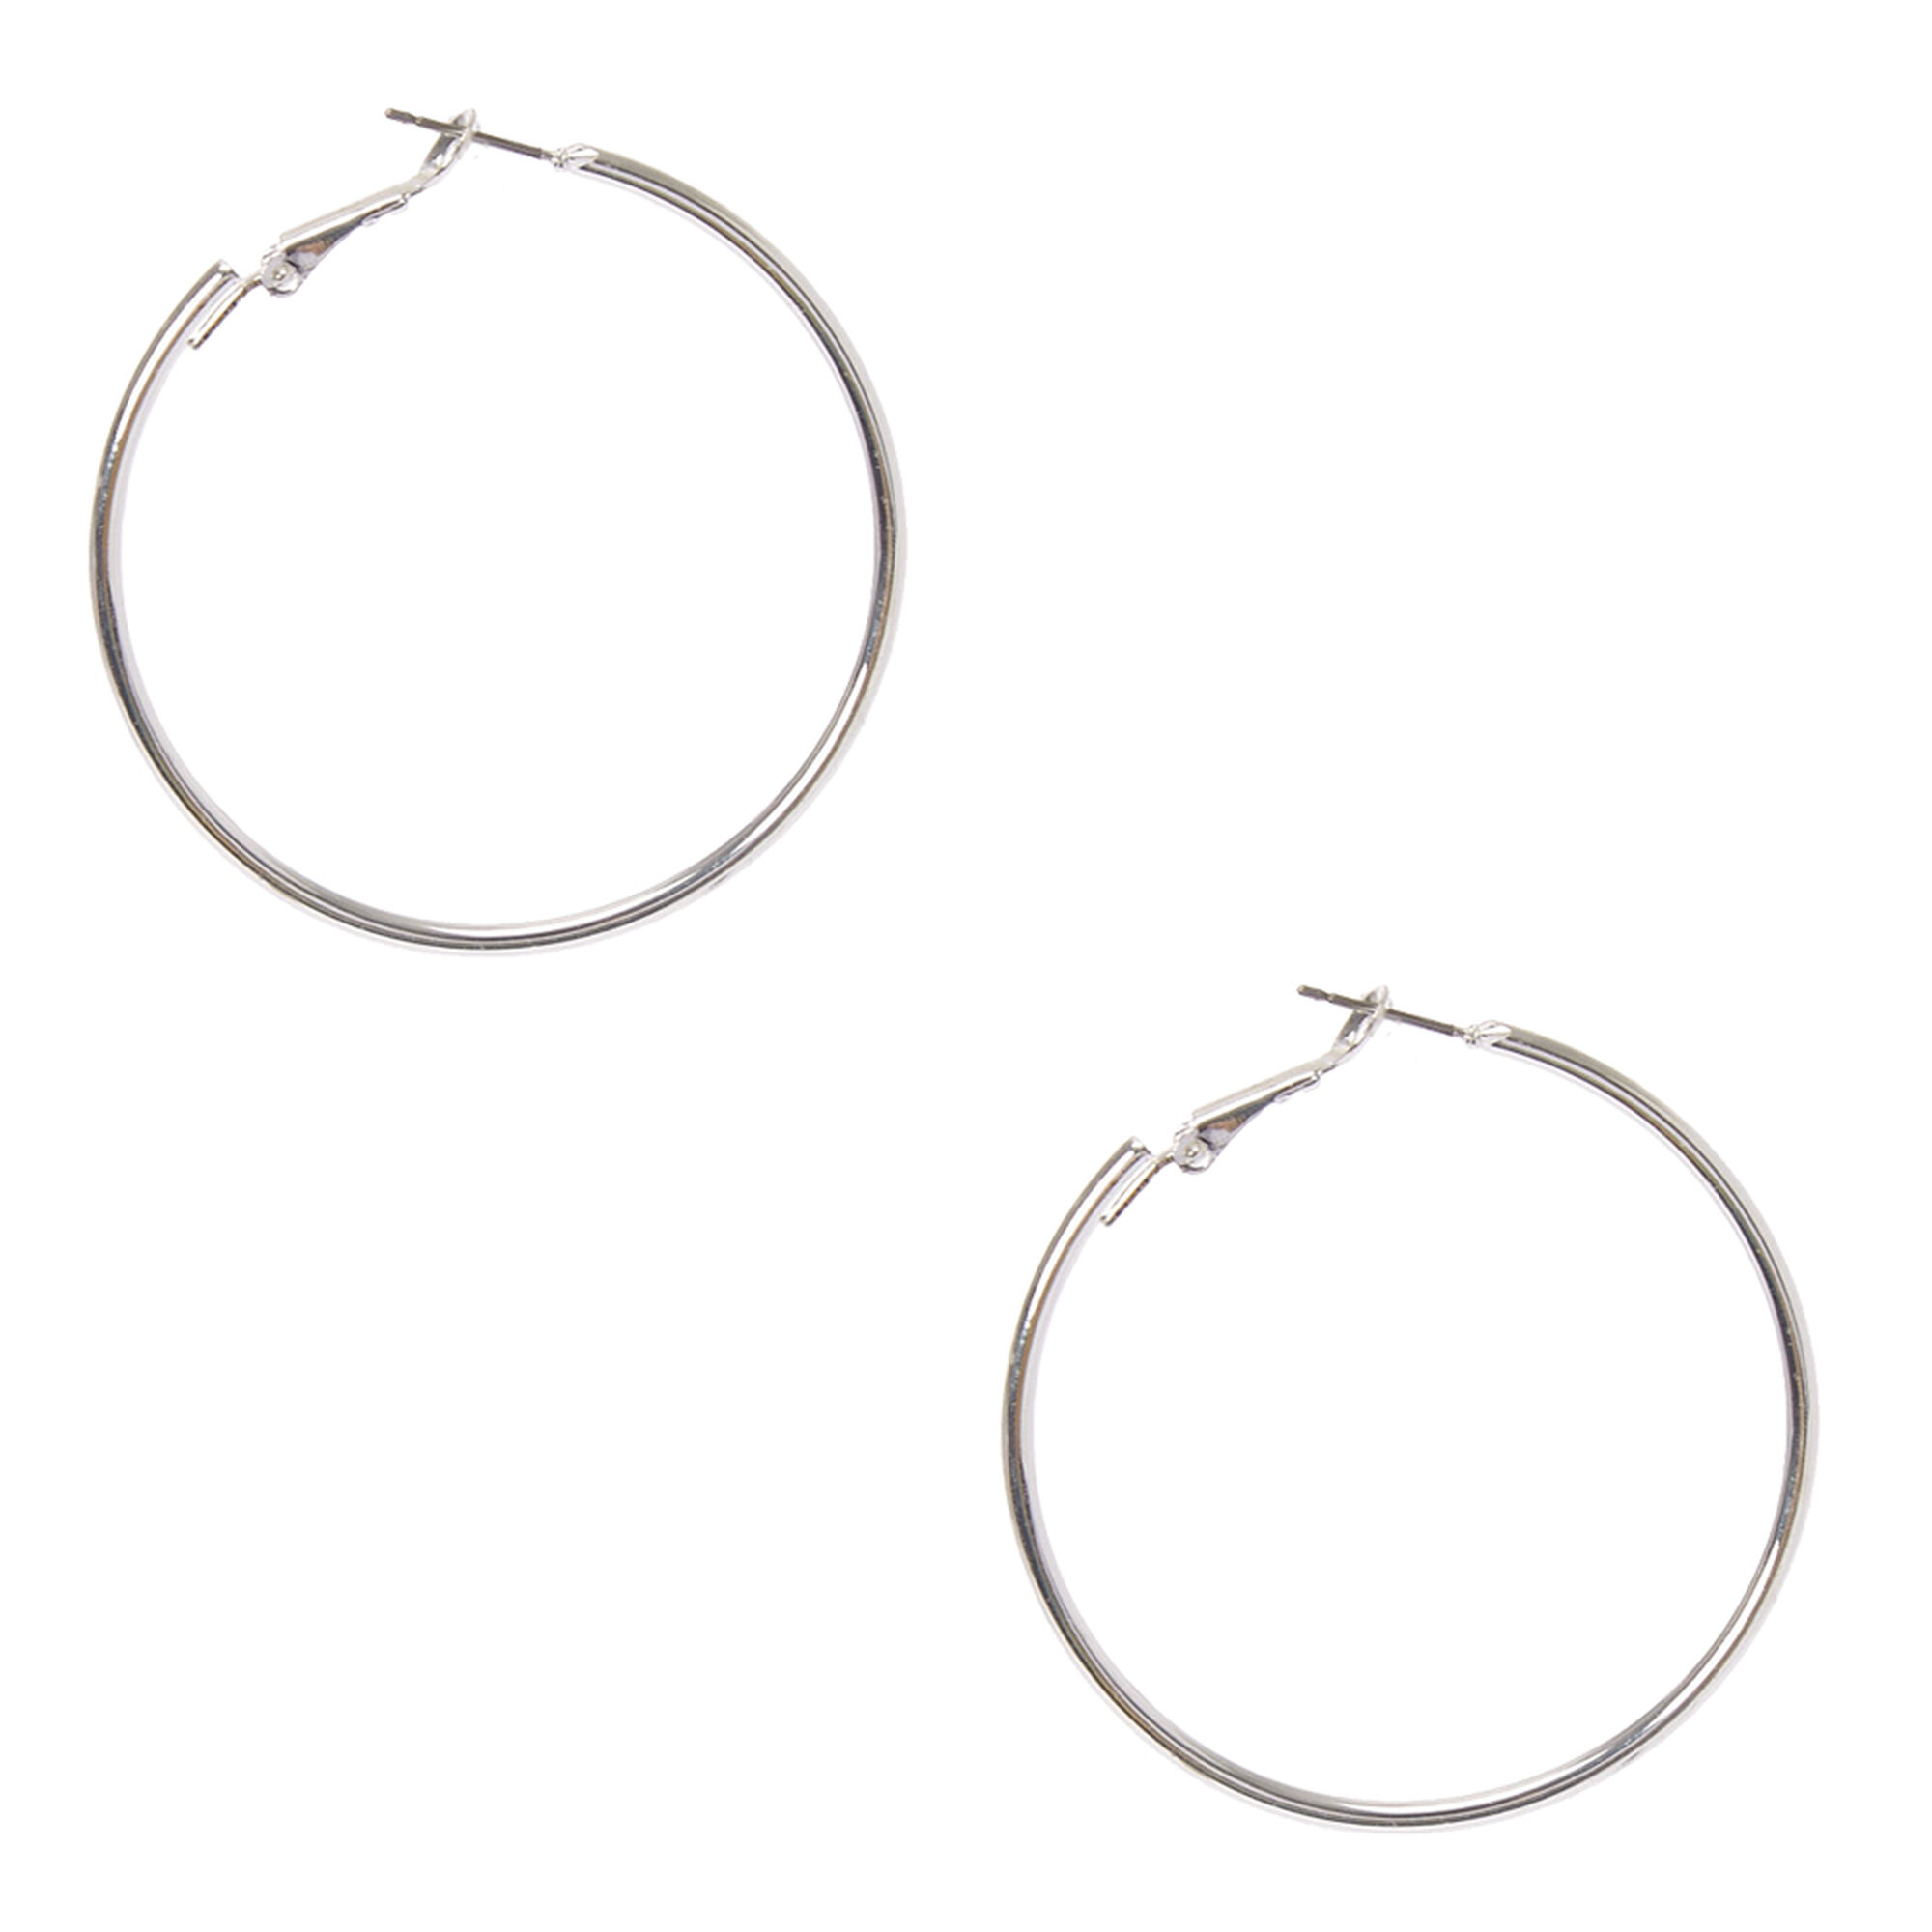 View Claires 50MM Hoop Earrings Silver information